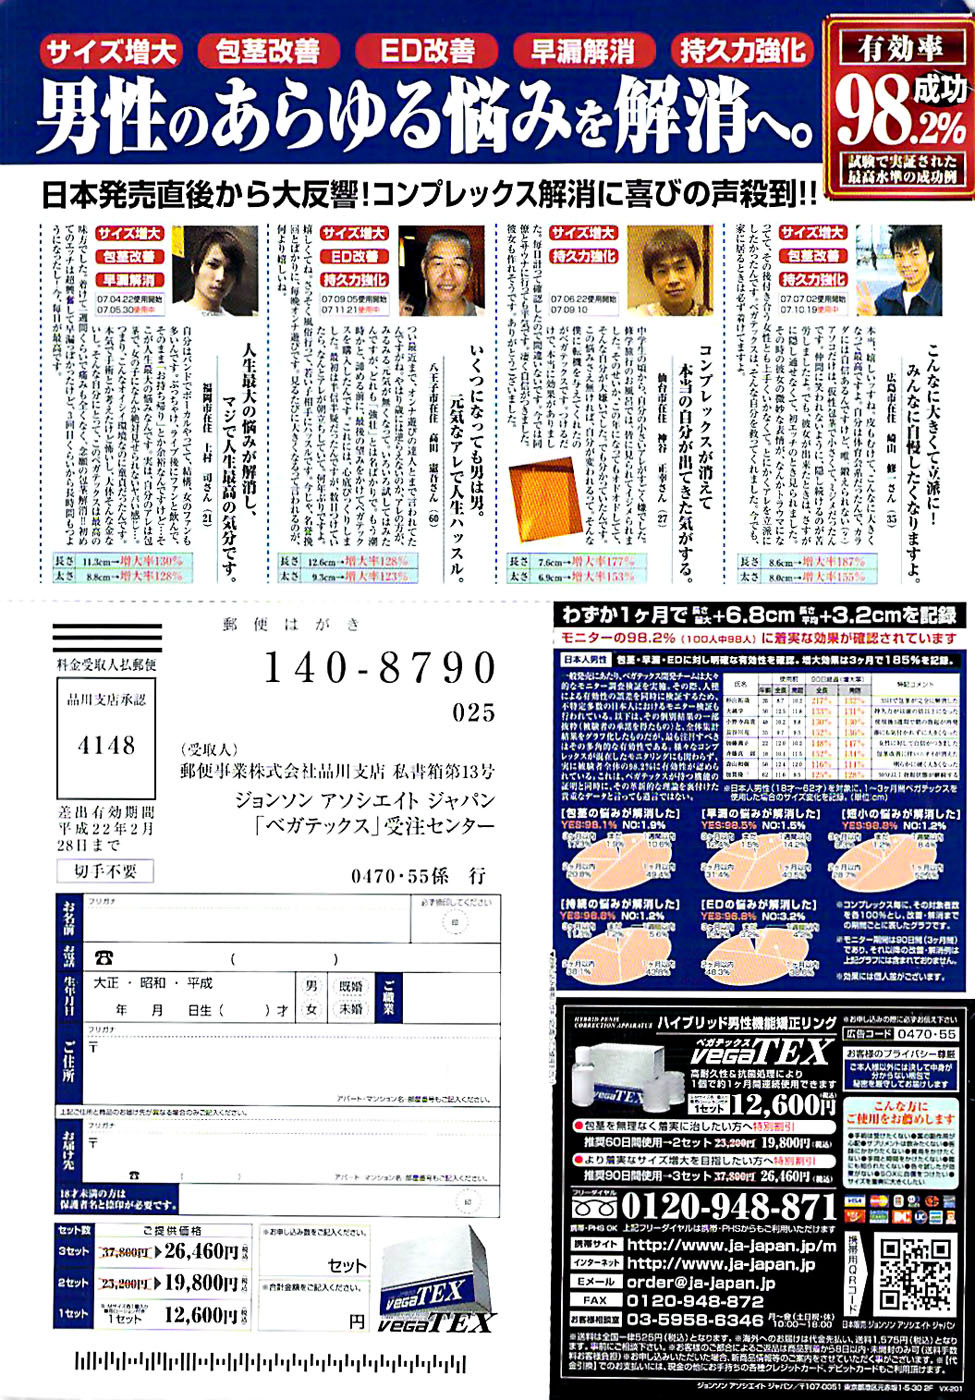 Action Pizazz SP 2008-09 page 271 full